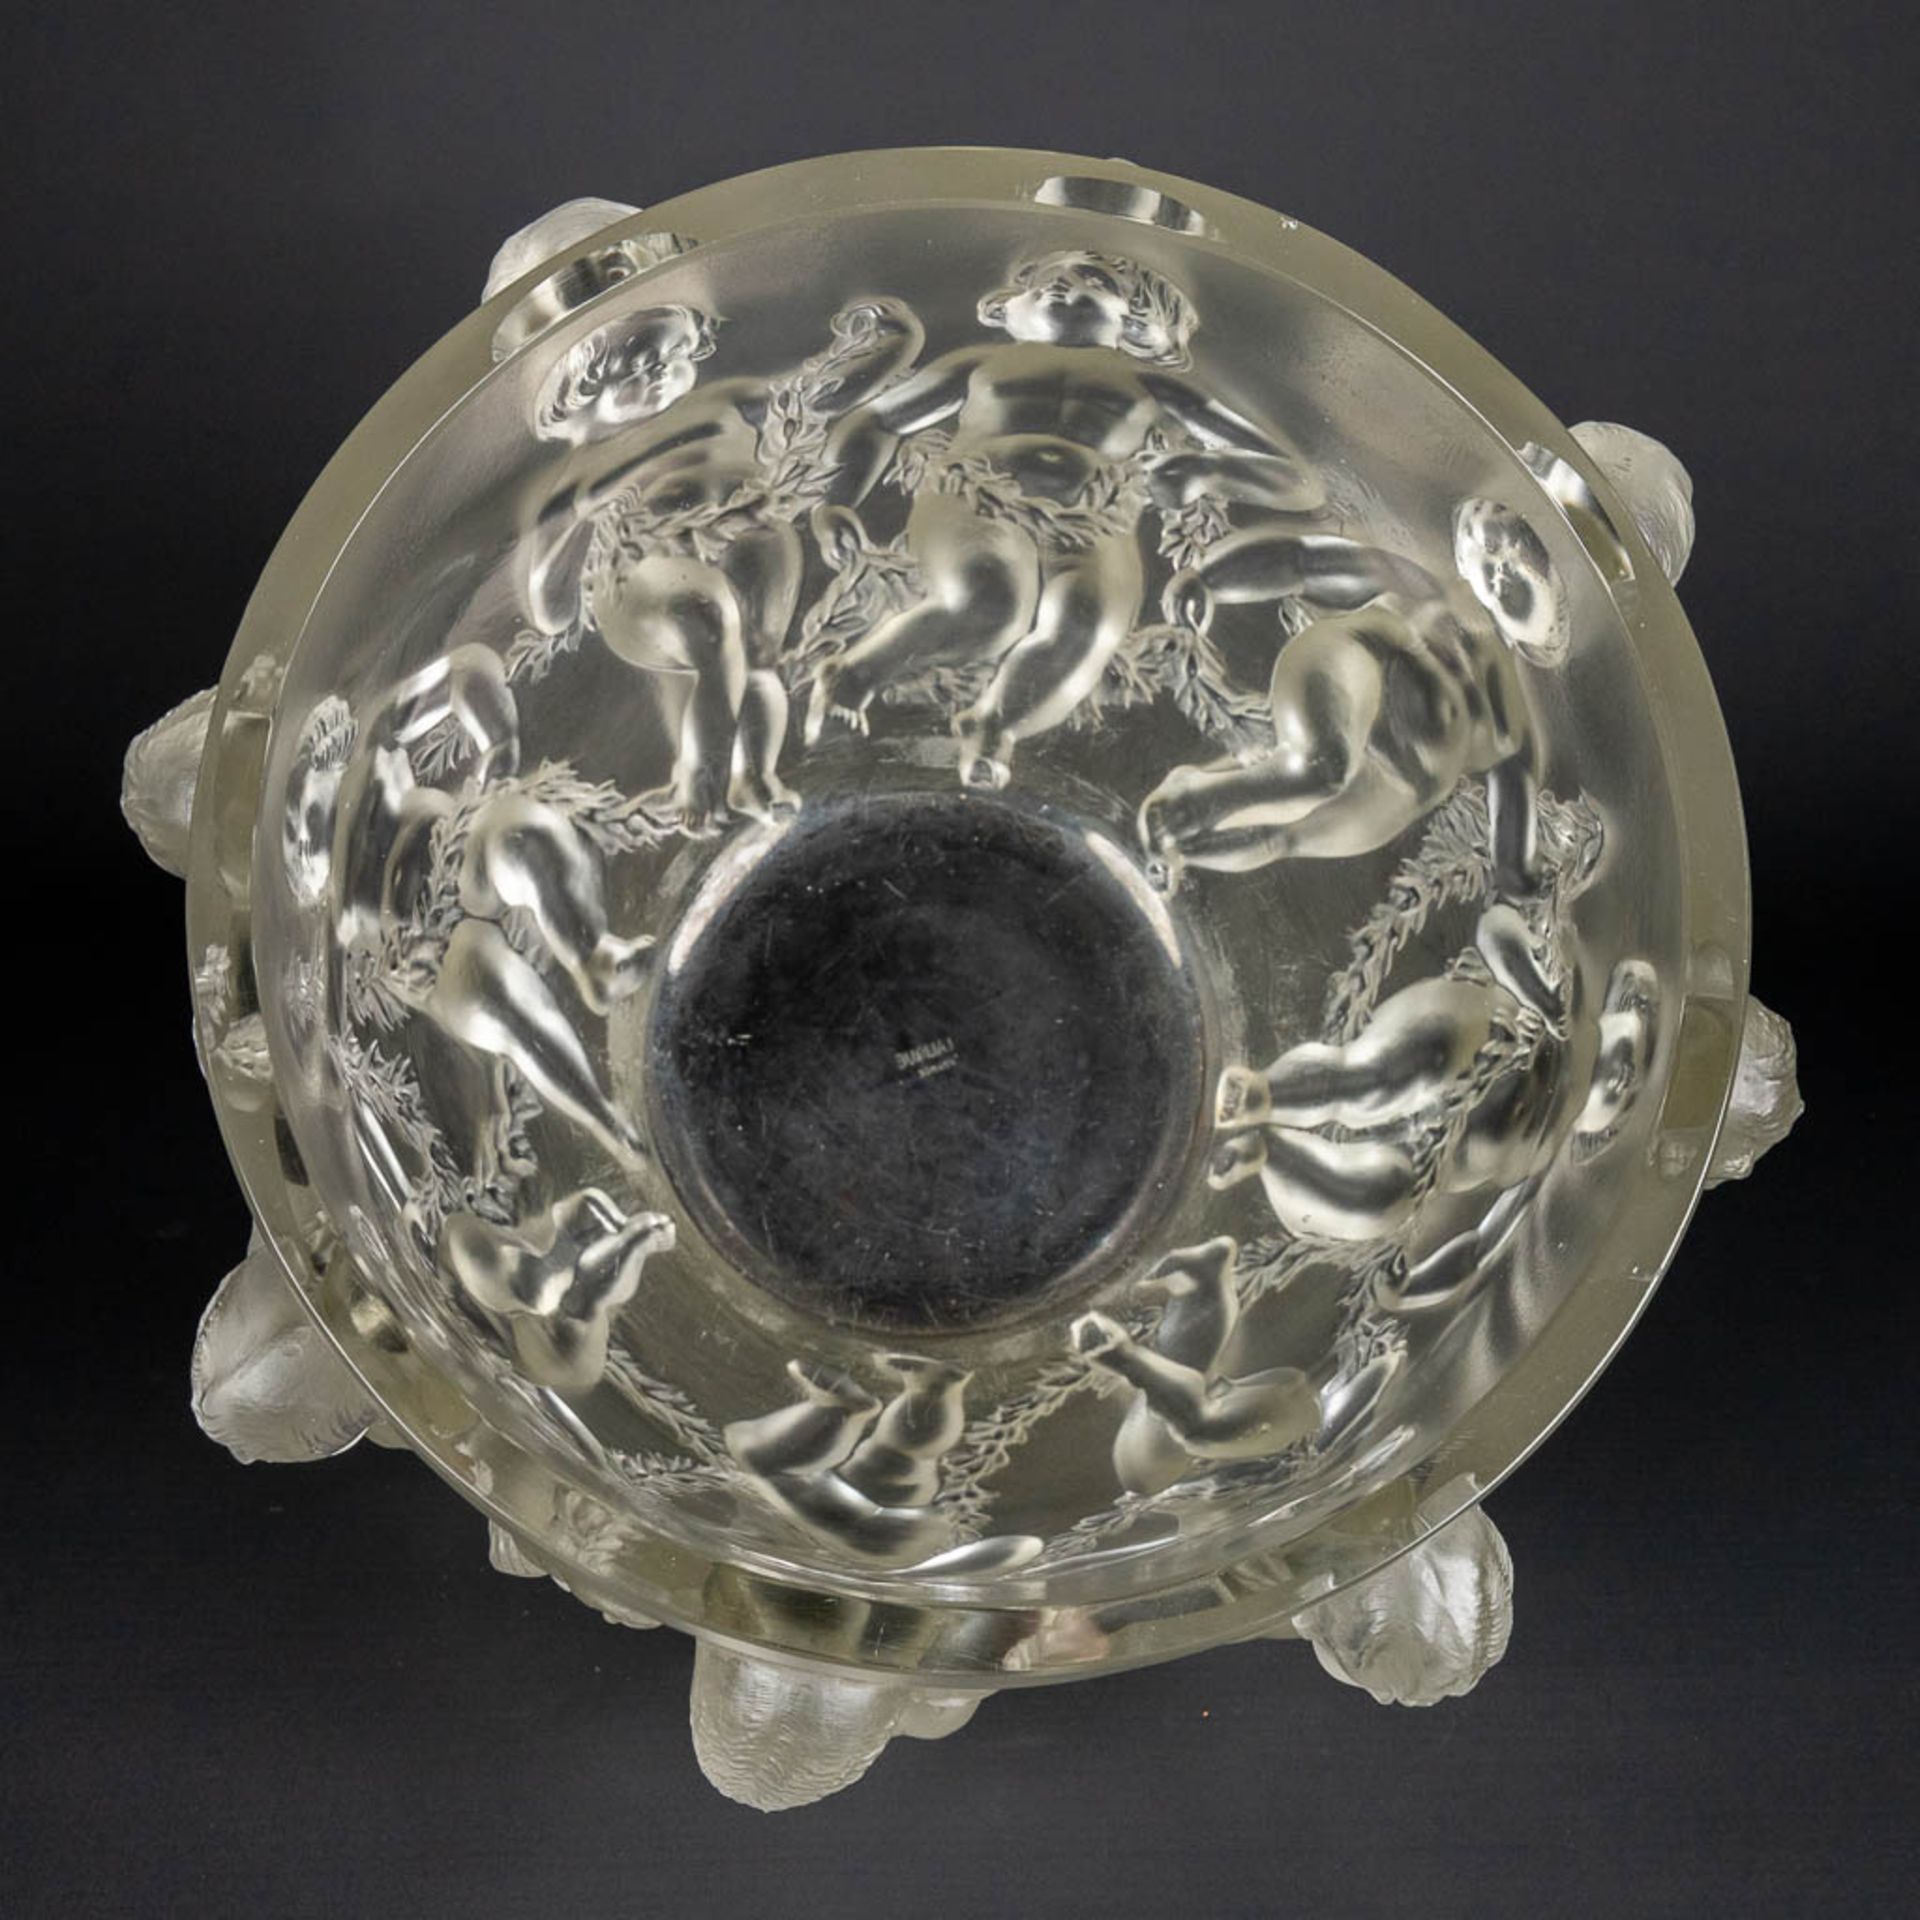 Lalique France 'Luxembourg' a large crystal bowl. (H:20 x D:32 cm) - Image 10 of 15